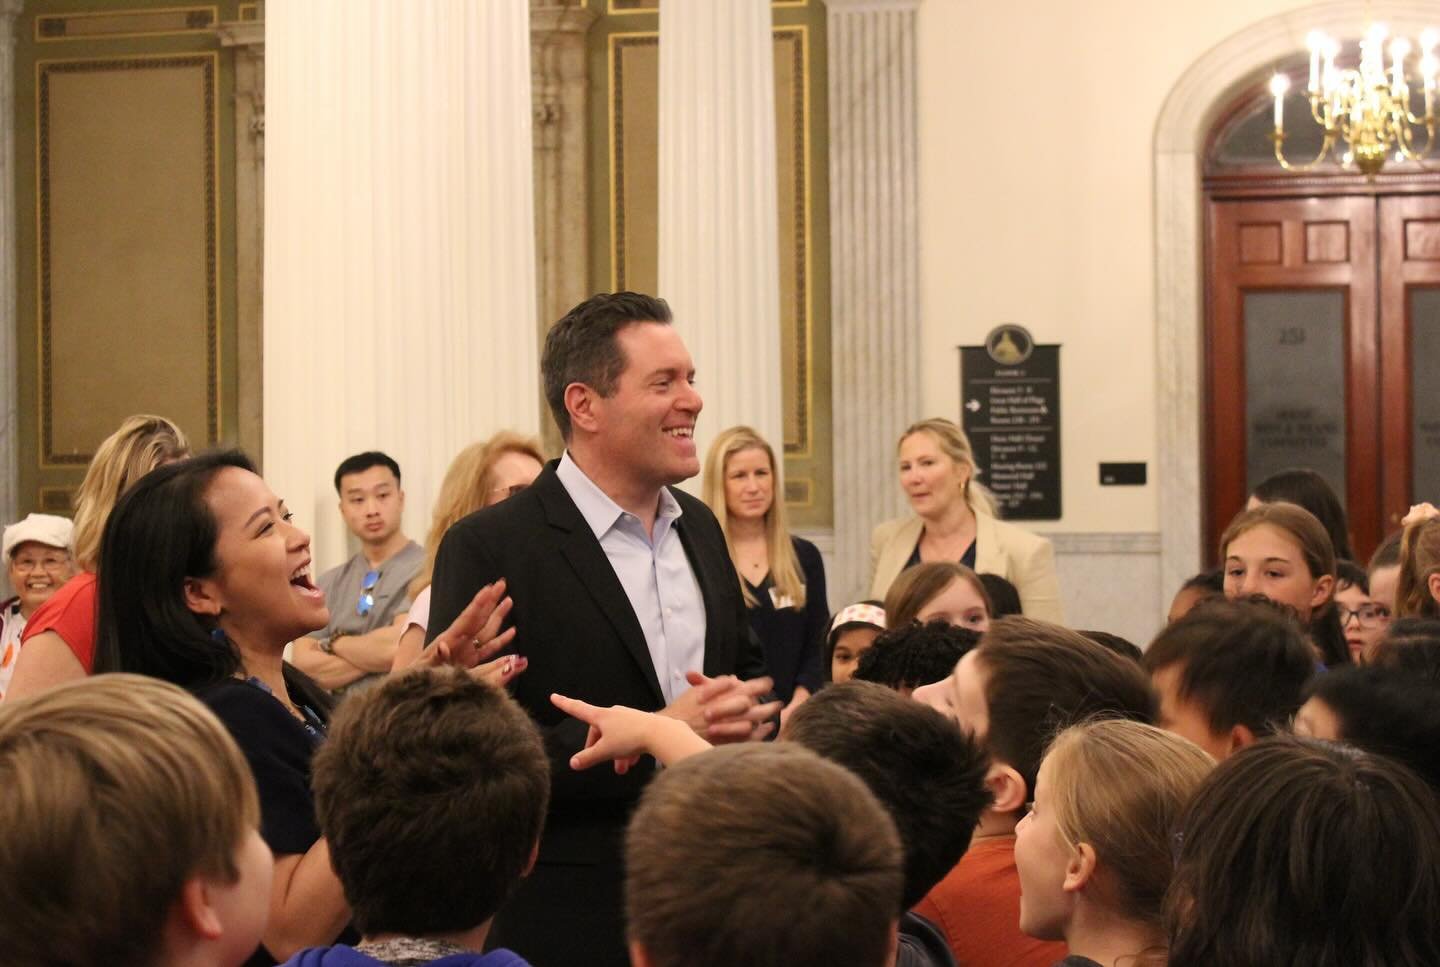 High Plain Elementary&rsquo;s Chorus performed their top hits at the State House today. After, Rep Nguyen and I spoke with the students about the role of government and asked what they thought about a law mandating 7 day school weeks. They were very 